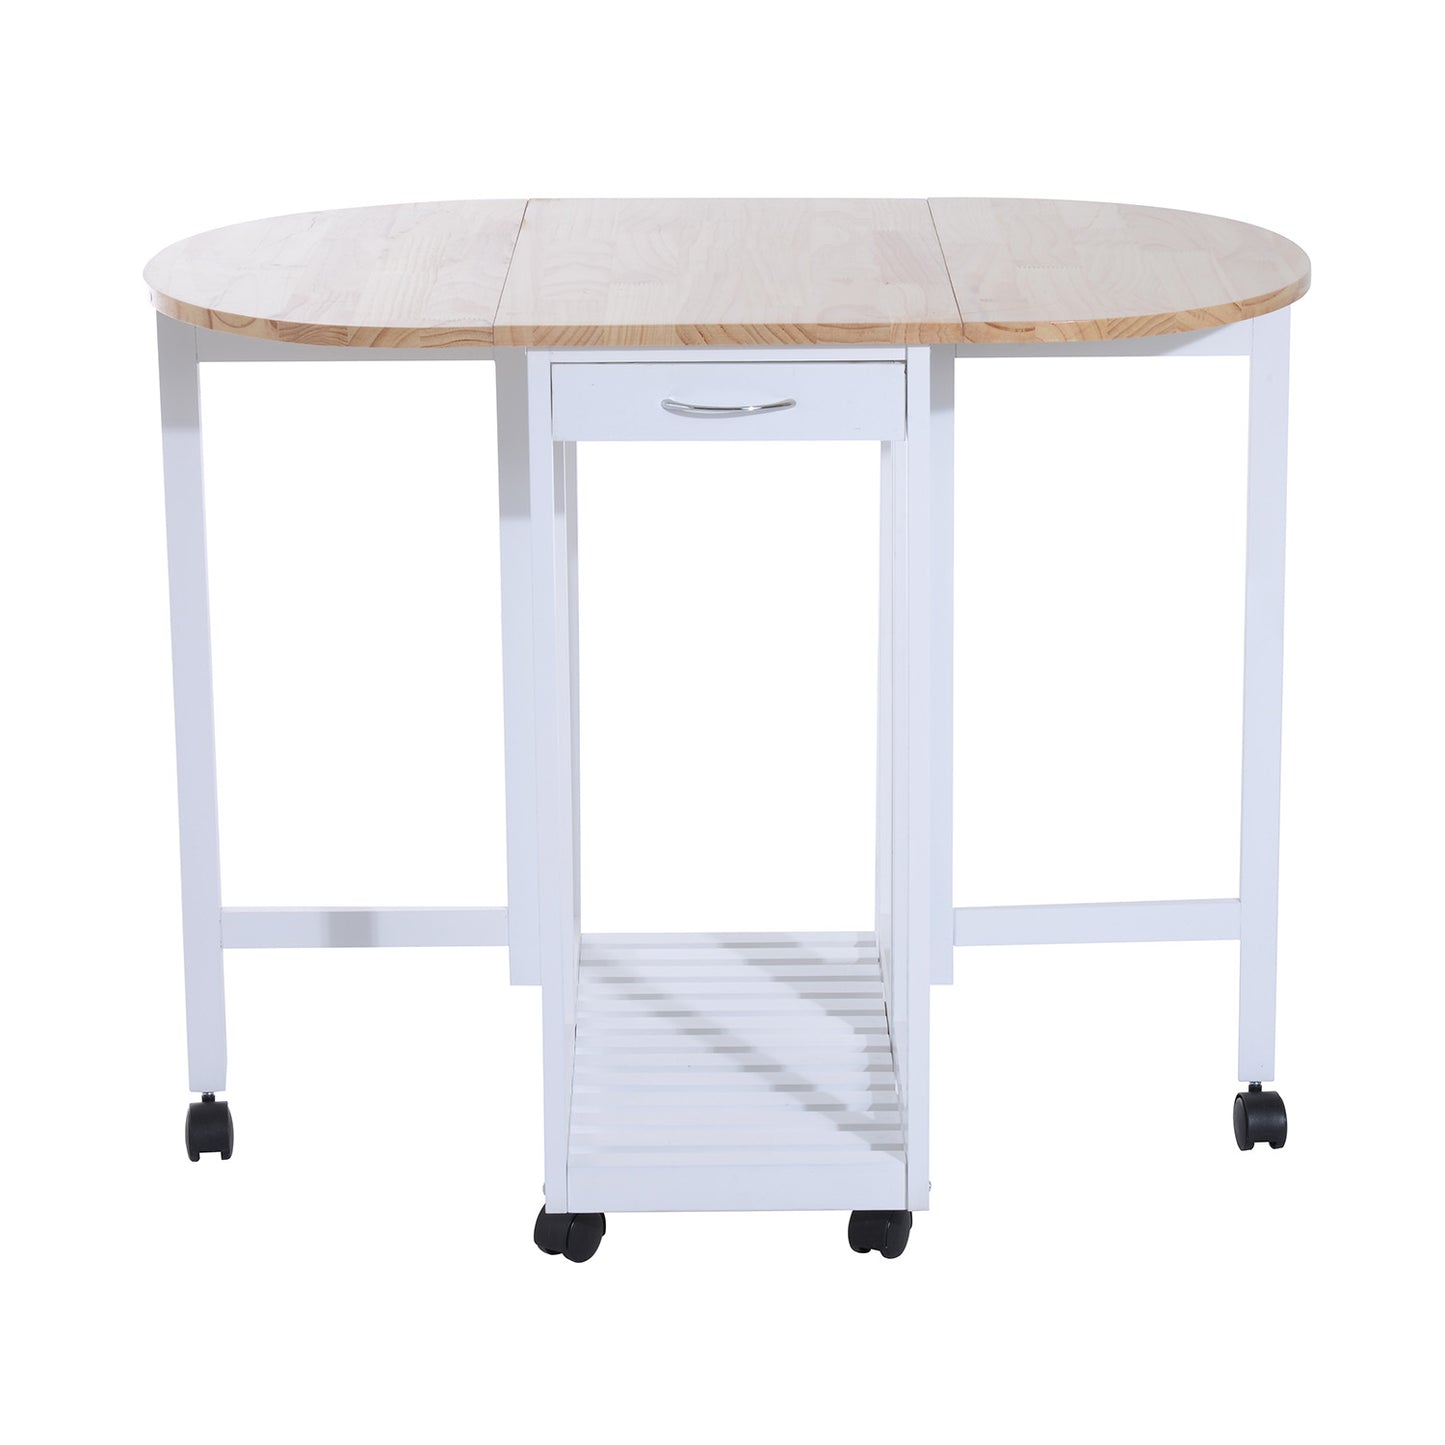 HOMCOM Pine Wood 3-Piece Compact Folding Dining Table with Stools White